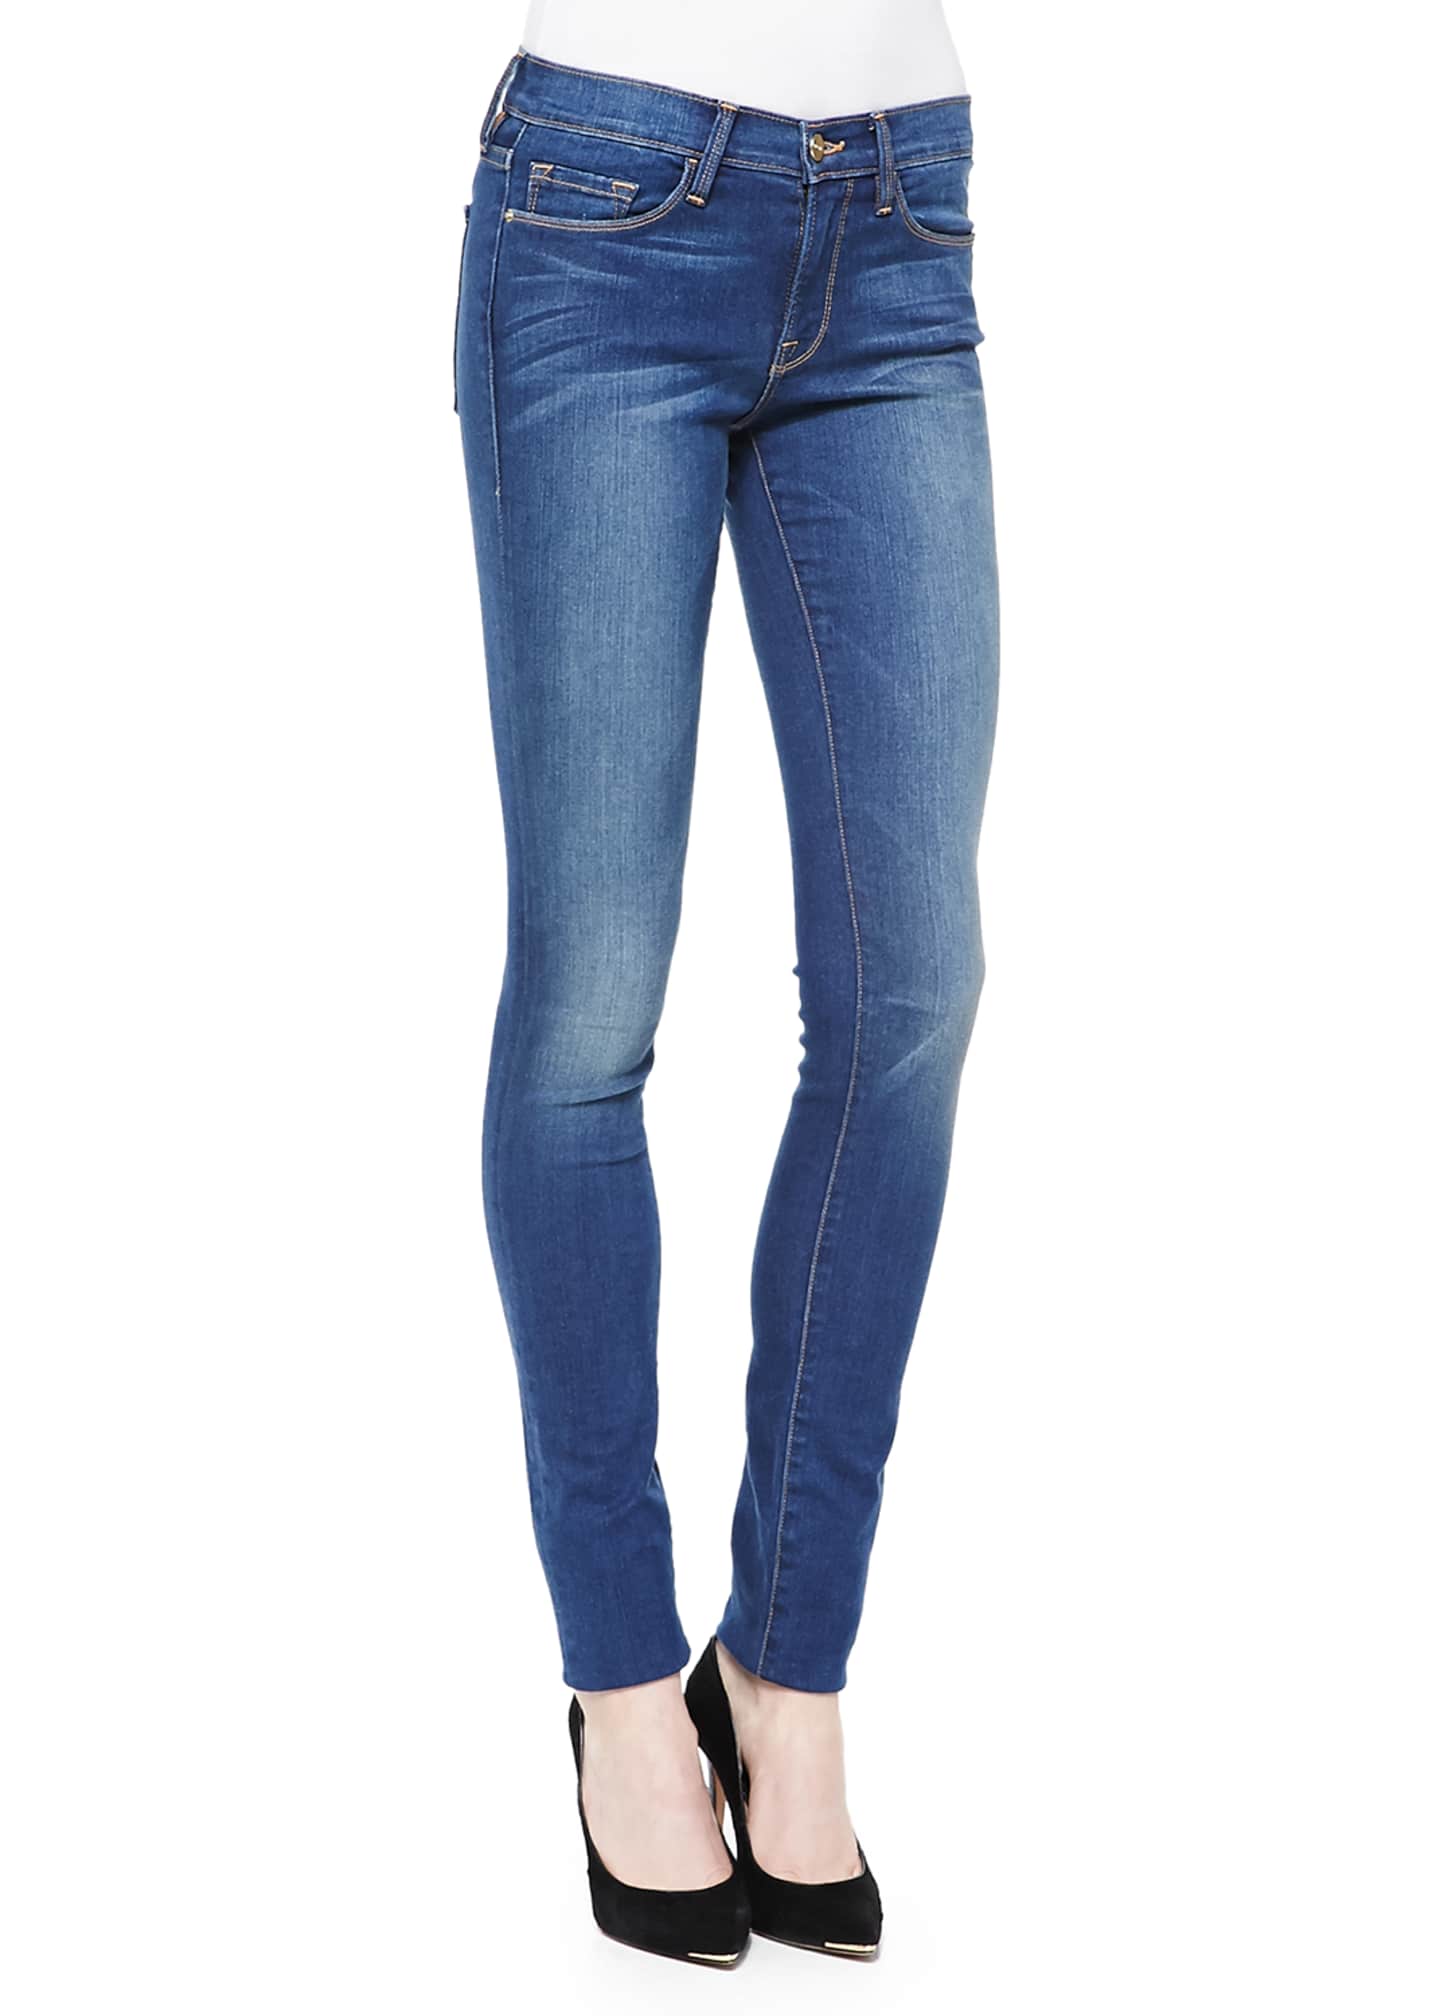 Women’s Contemporary Jeans at Bergdorf Goodman